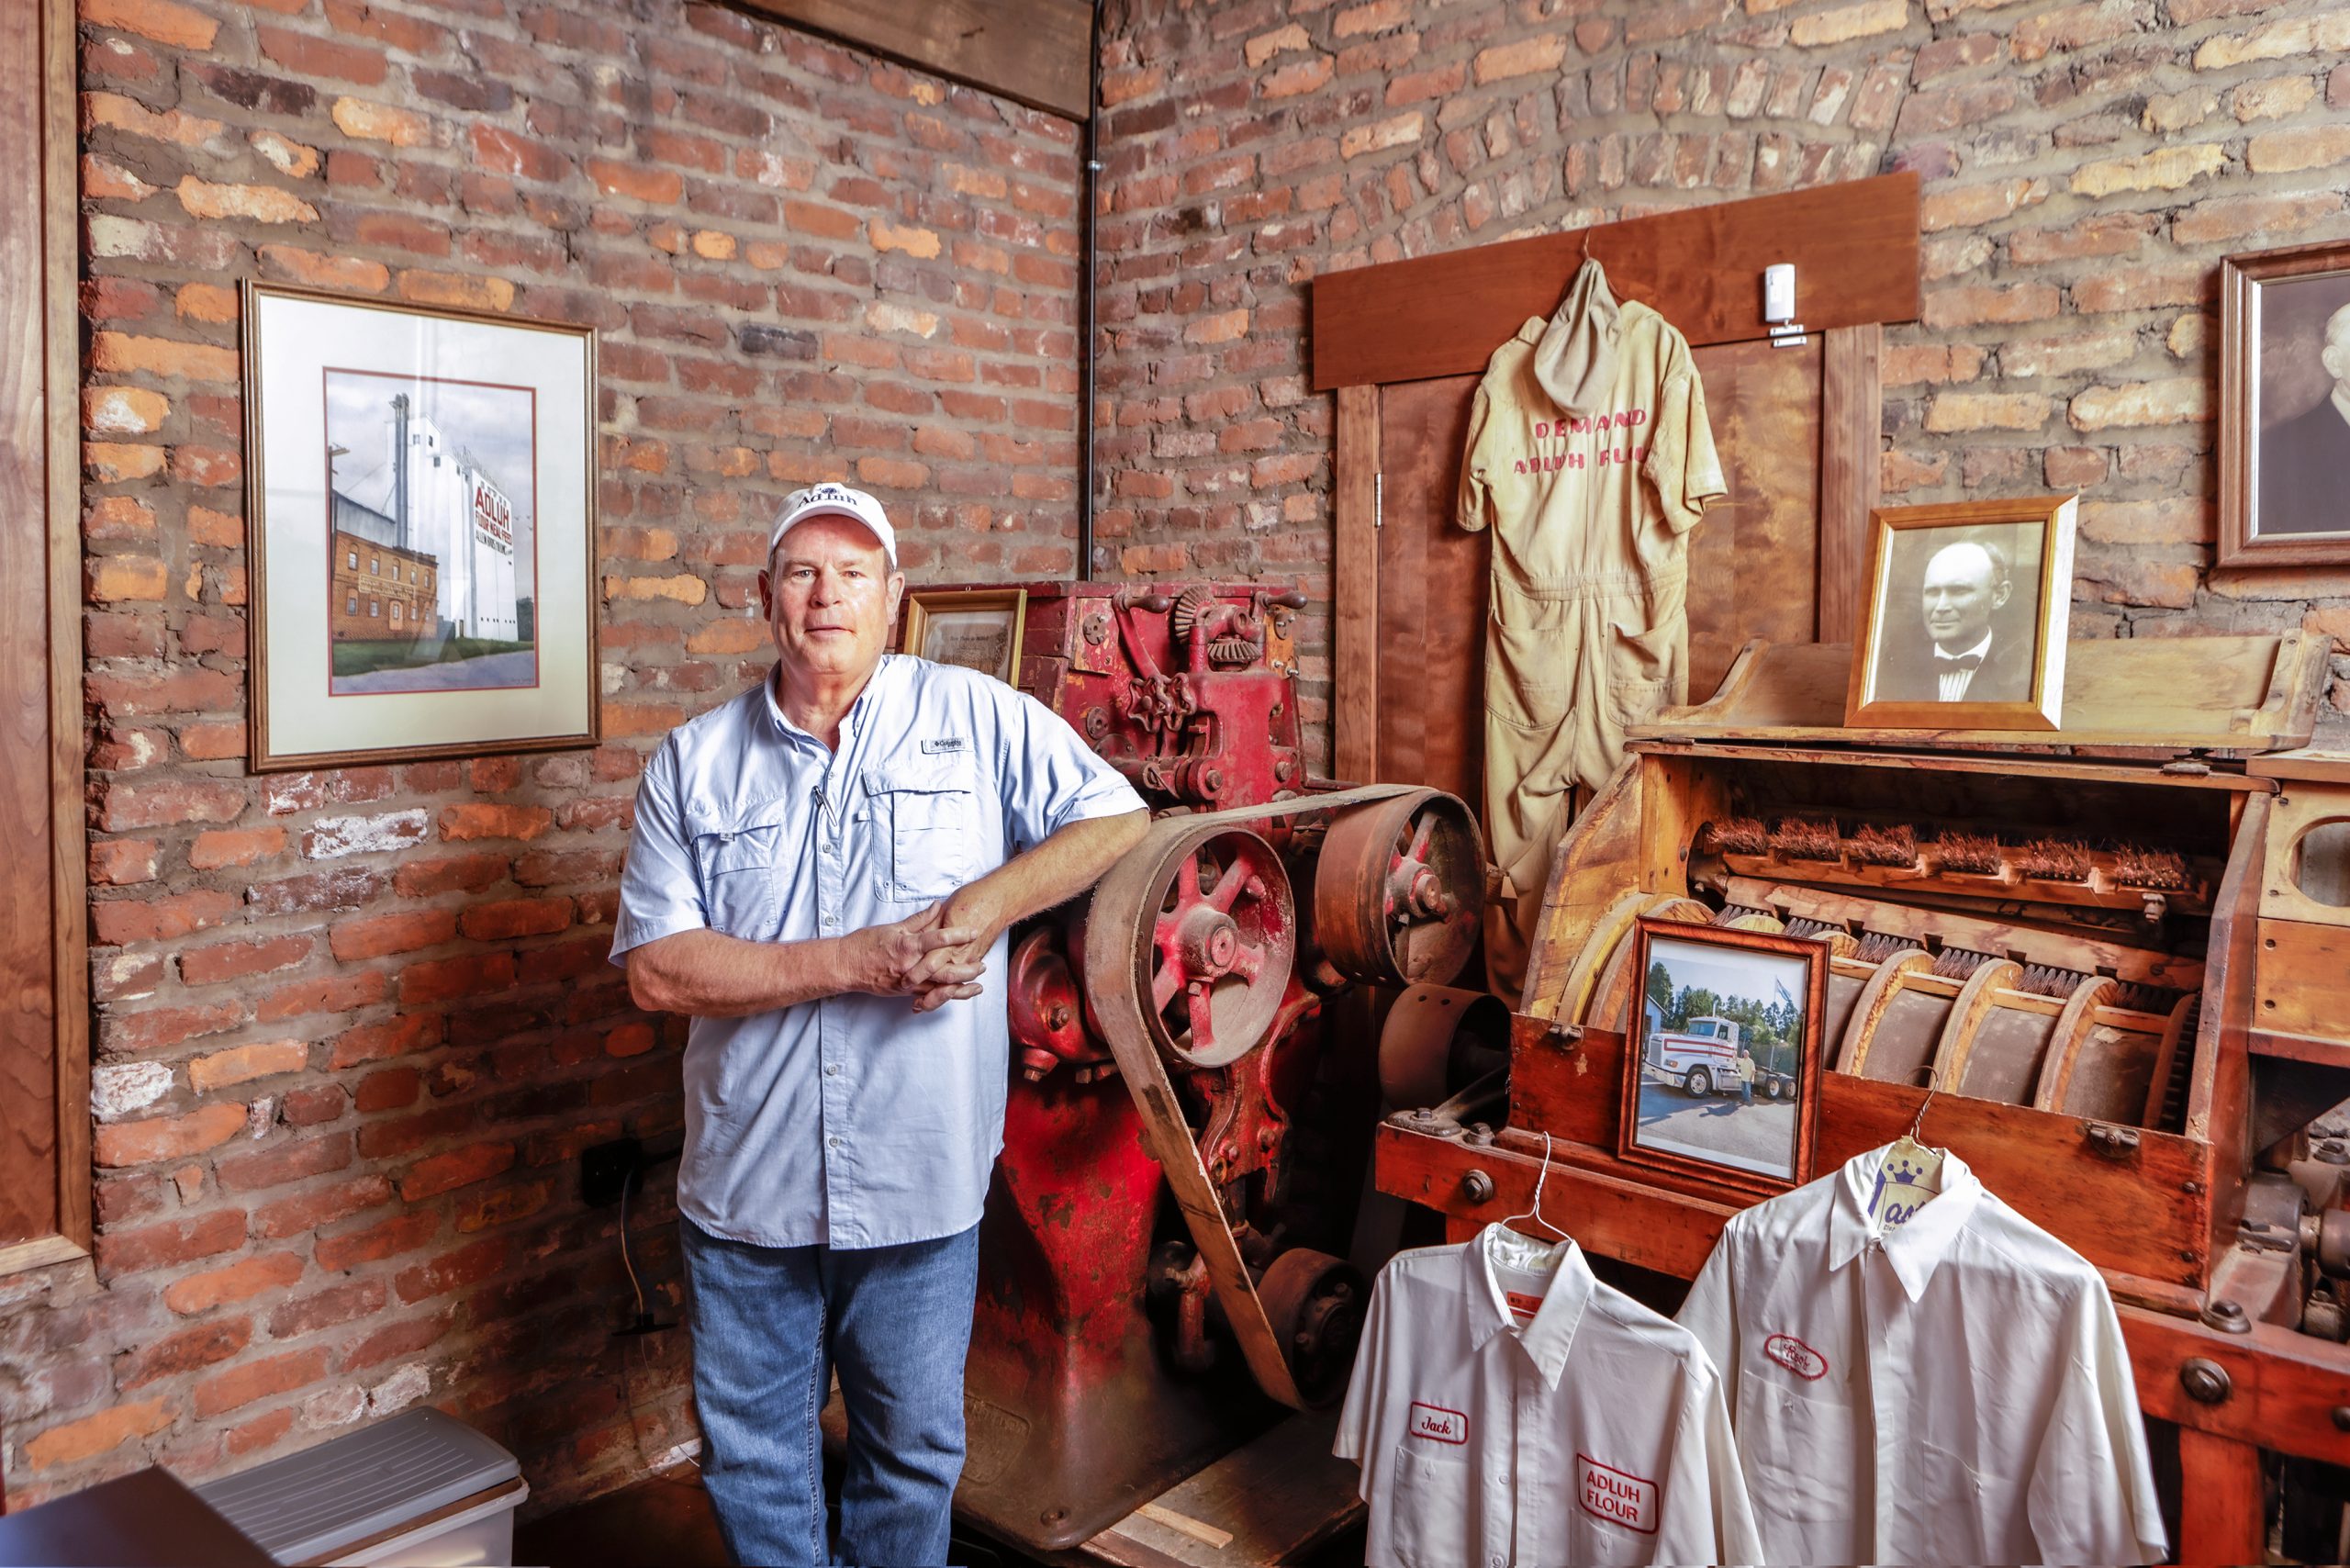 Bill Allen, president of Adluh Flour, stands in the historic offices built around 1900. The rooms are now a museum with historical memorabilia of Adluh Flour and the Allen Brothers Milling Company.
